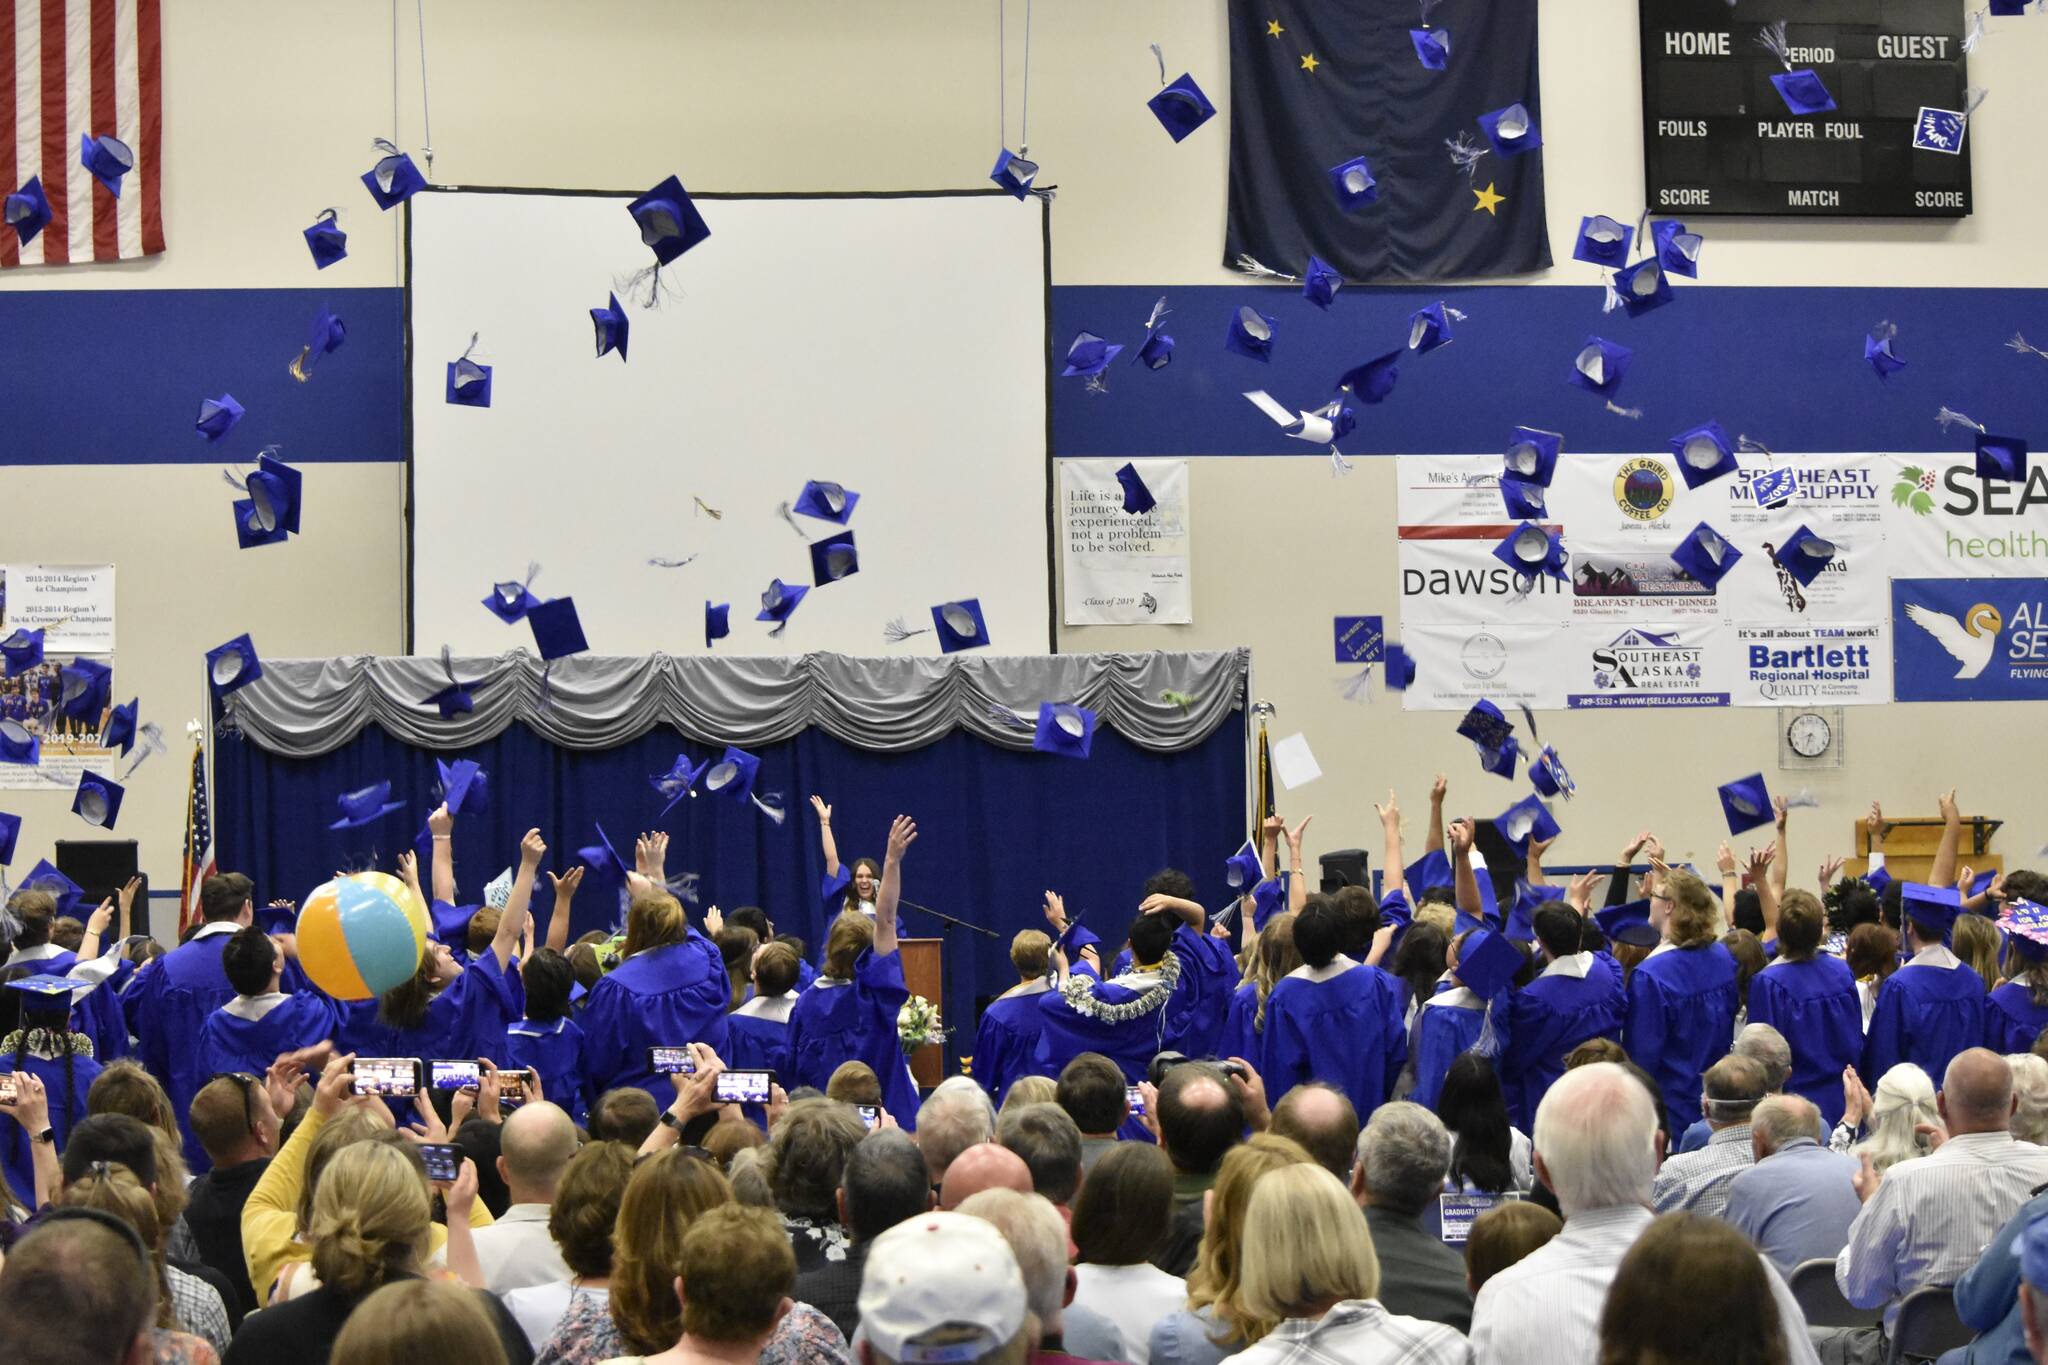 Thunder Mountain High School students throw their caps in celebration at the graduation ceremony for the class of 2022 on Sunday, May 29, 2022. (Peter Segall / Juneau Empire)